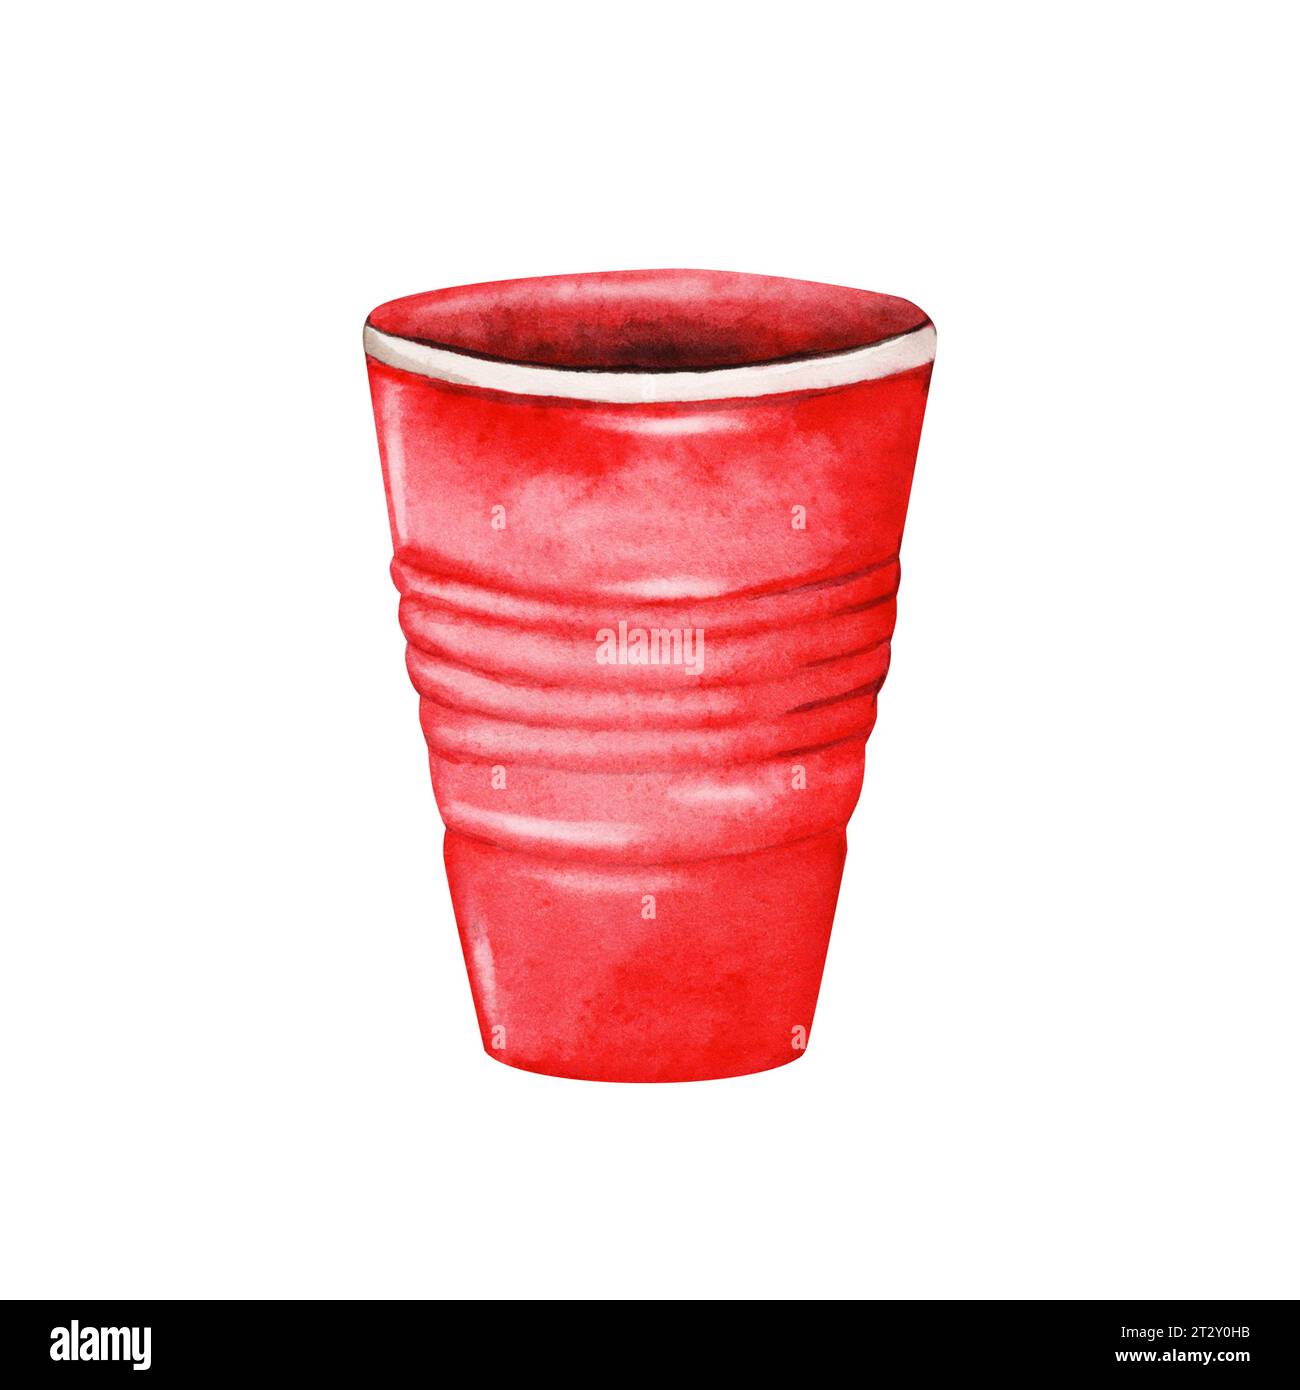 https://c8.alamy.com/comp/2T2Y0HB/red-plastic-disposable-cup-hand-drawn-watercolor-illustration-isolated-on-white-background-pink-glass-for-cocktails-water-and-soft-drinks-2T2Y0HB.jpg